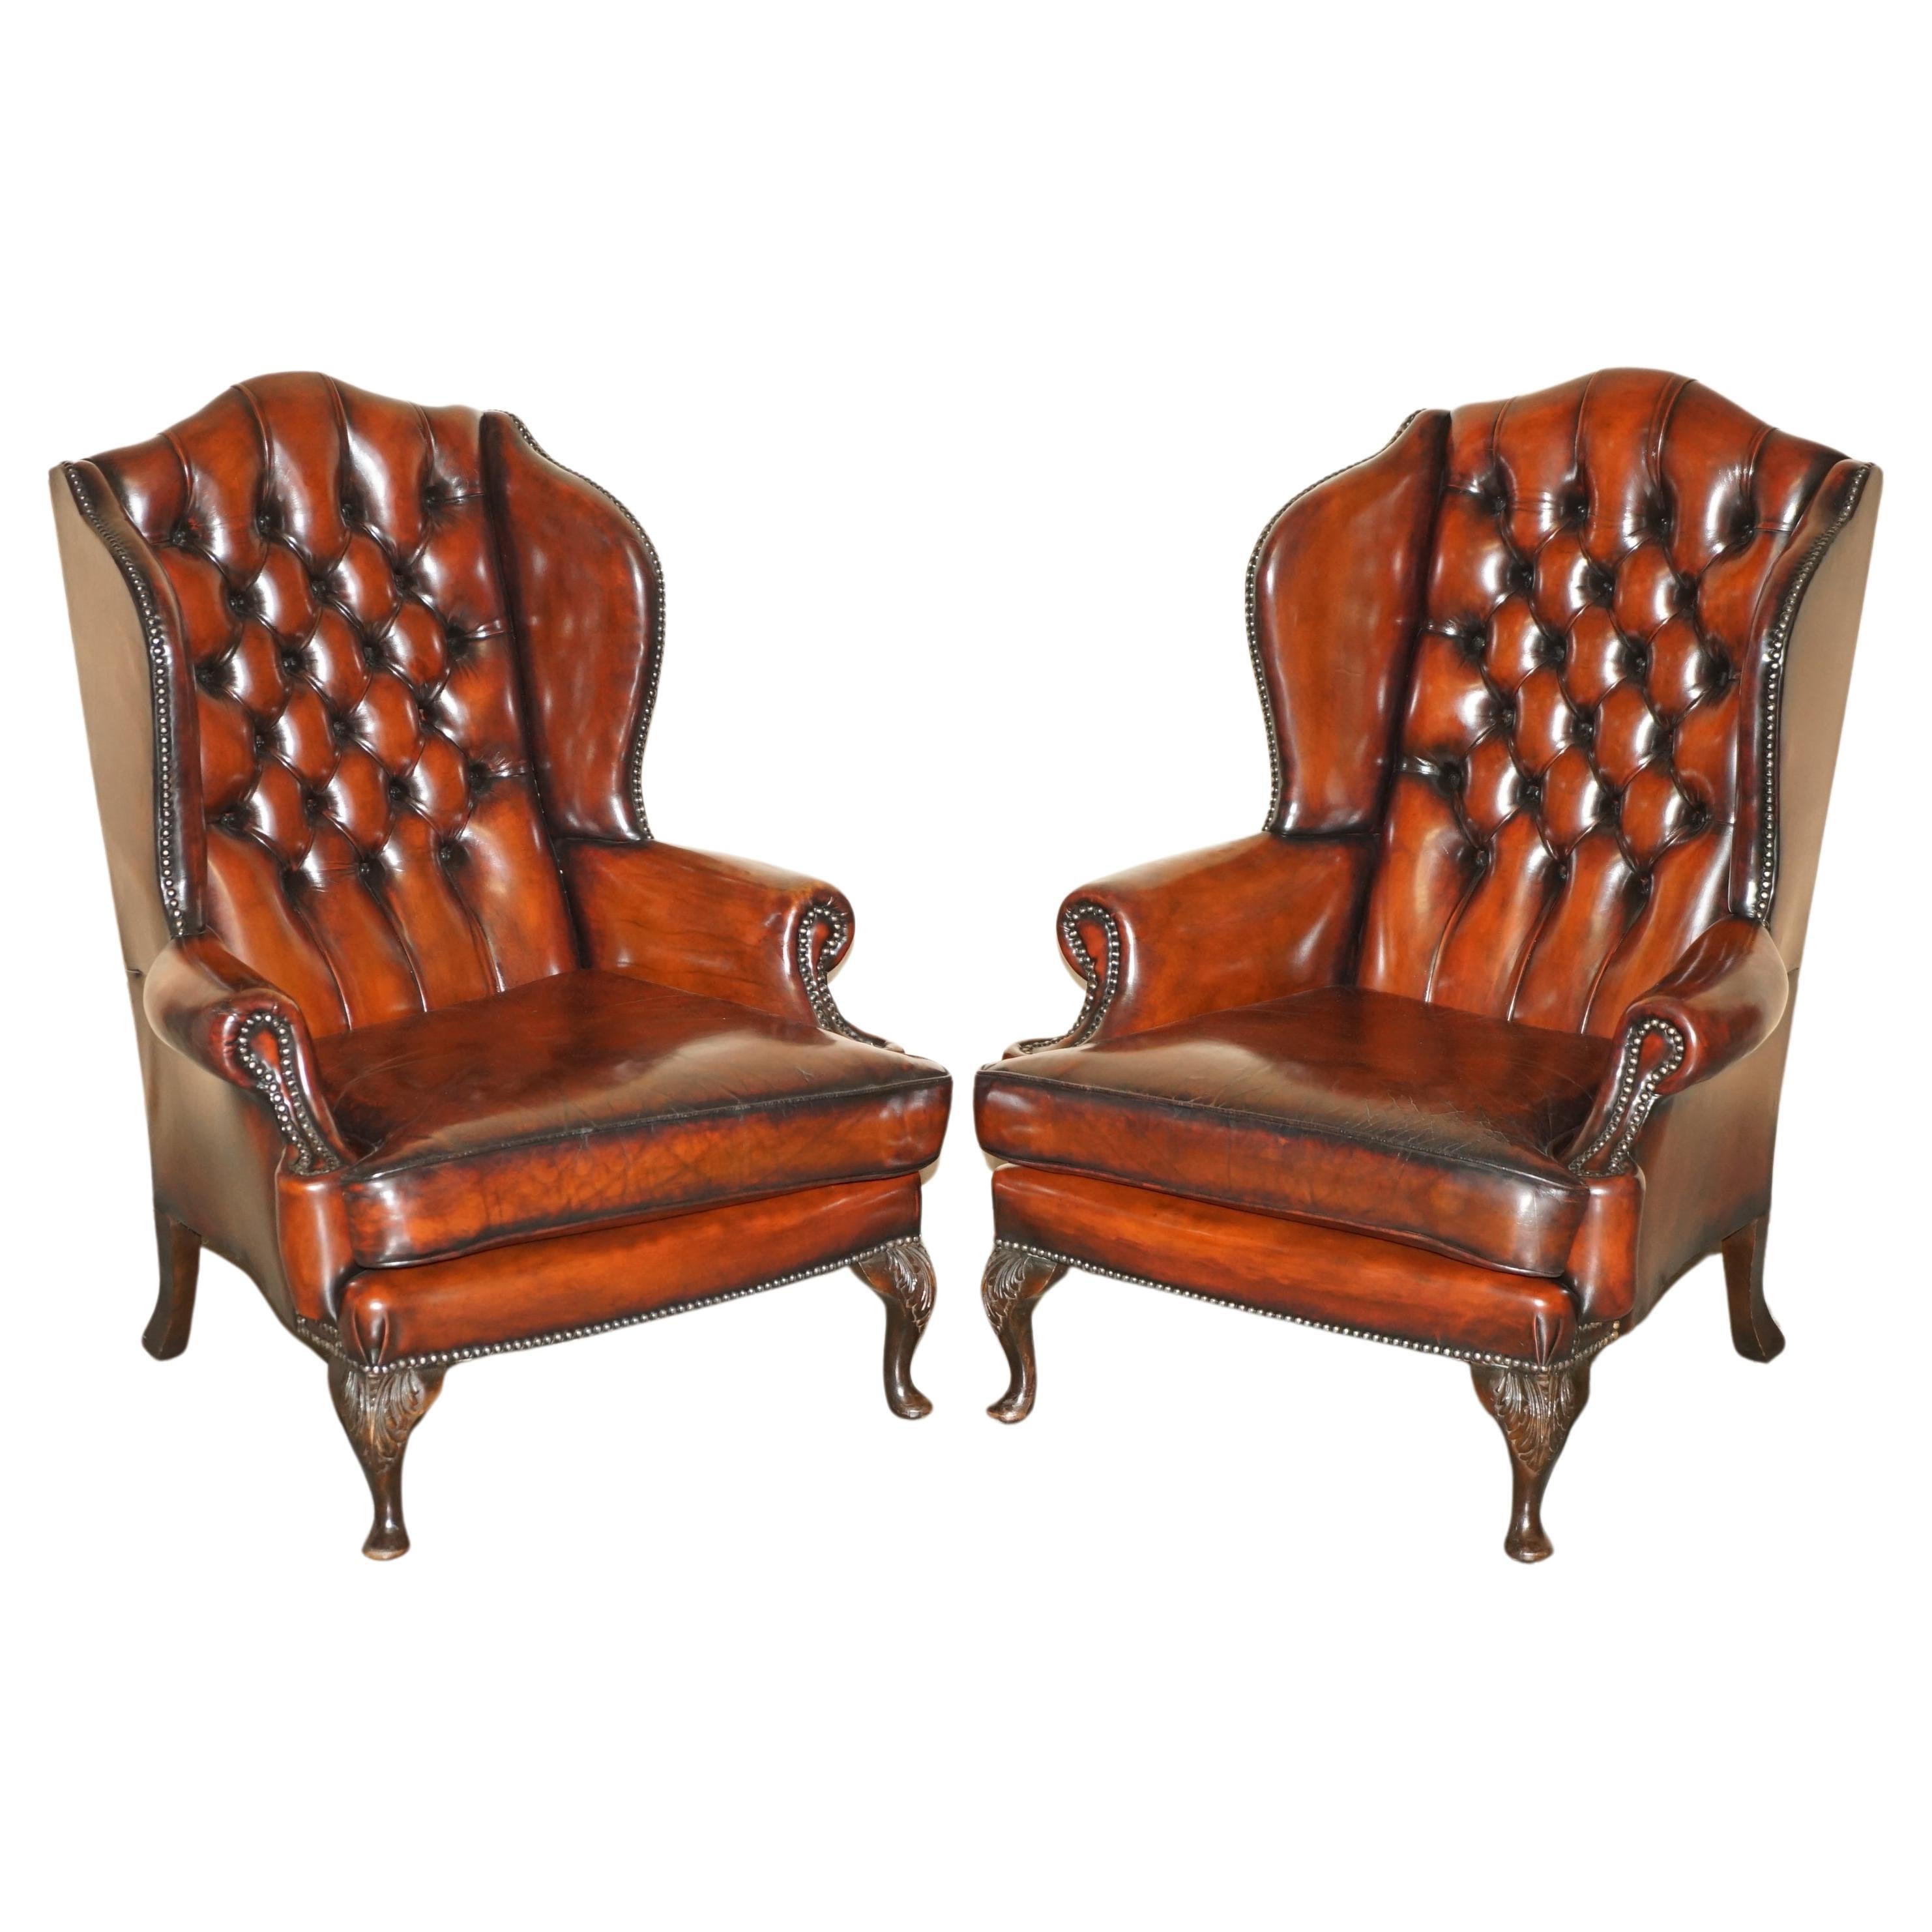 FINE PAIR OF RESTORED HAND DYED BORDEAUX LEATHER CHESTERFIELD WINGBACK ARMCHAIRs